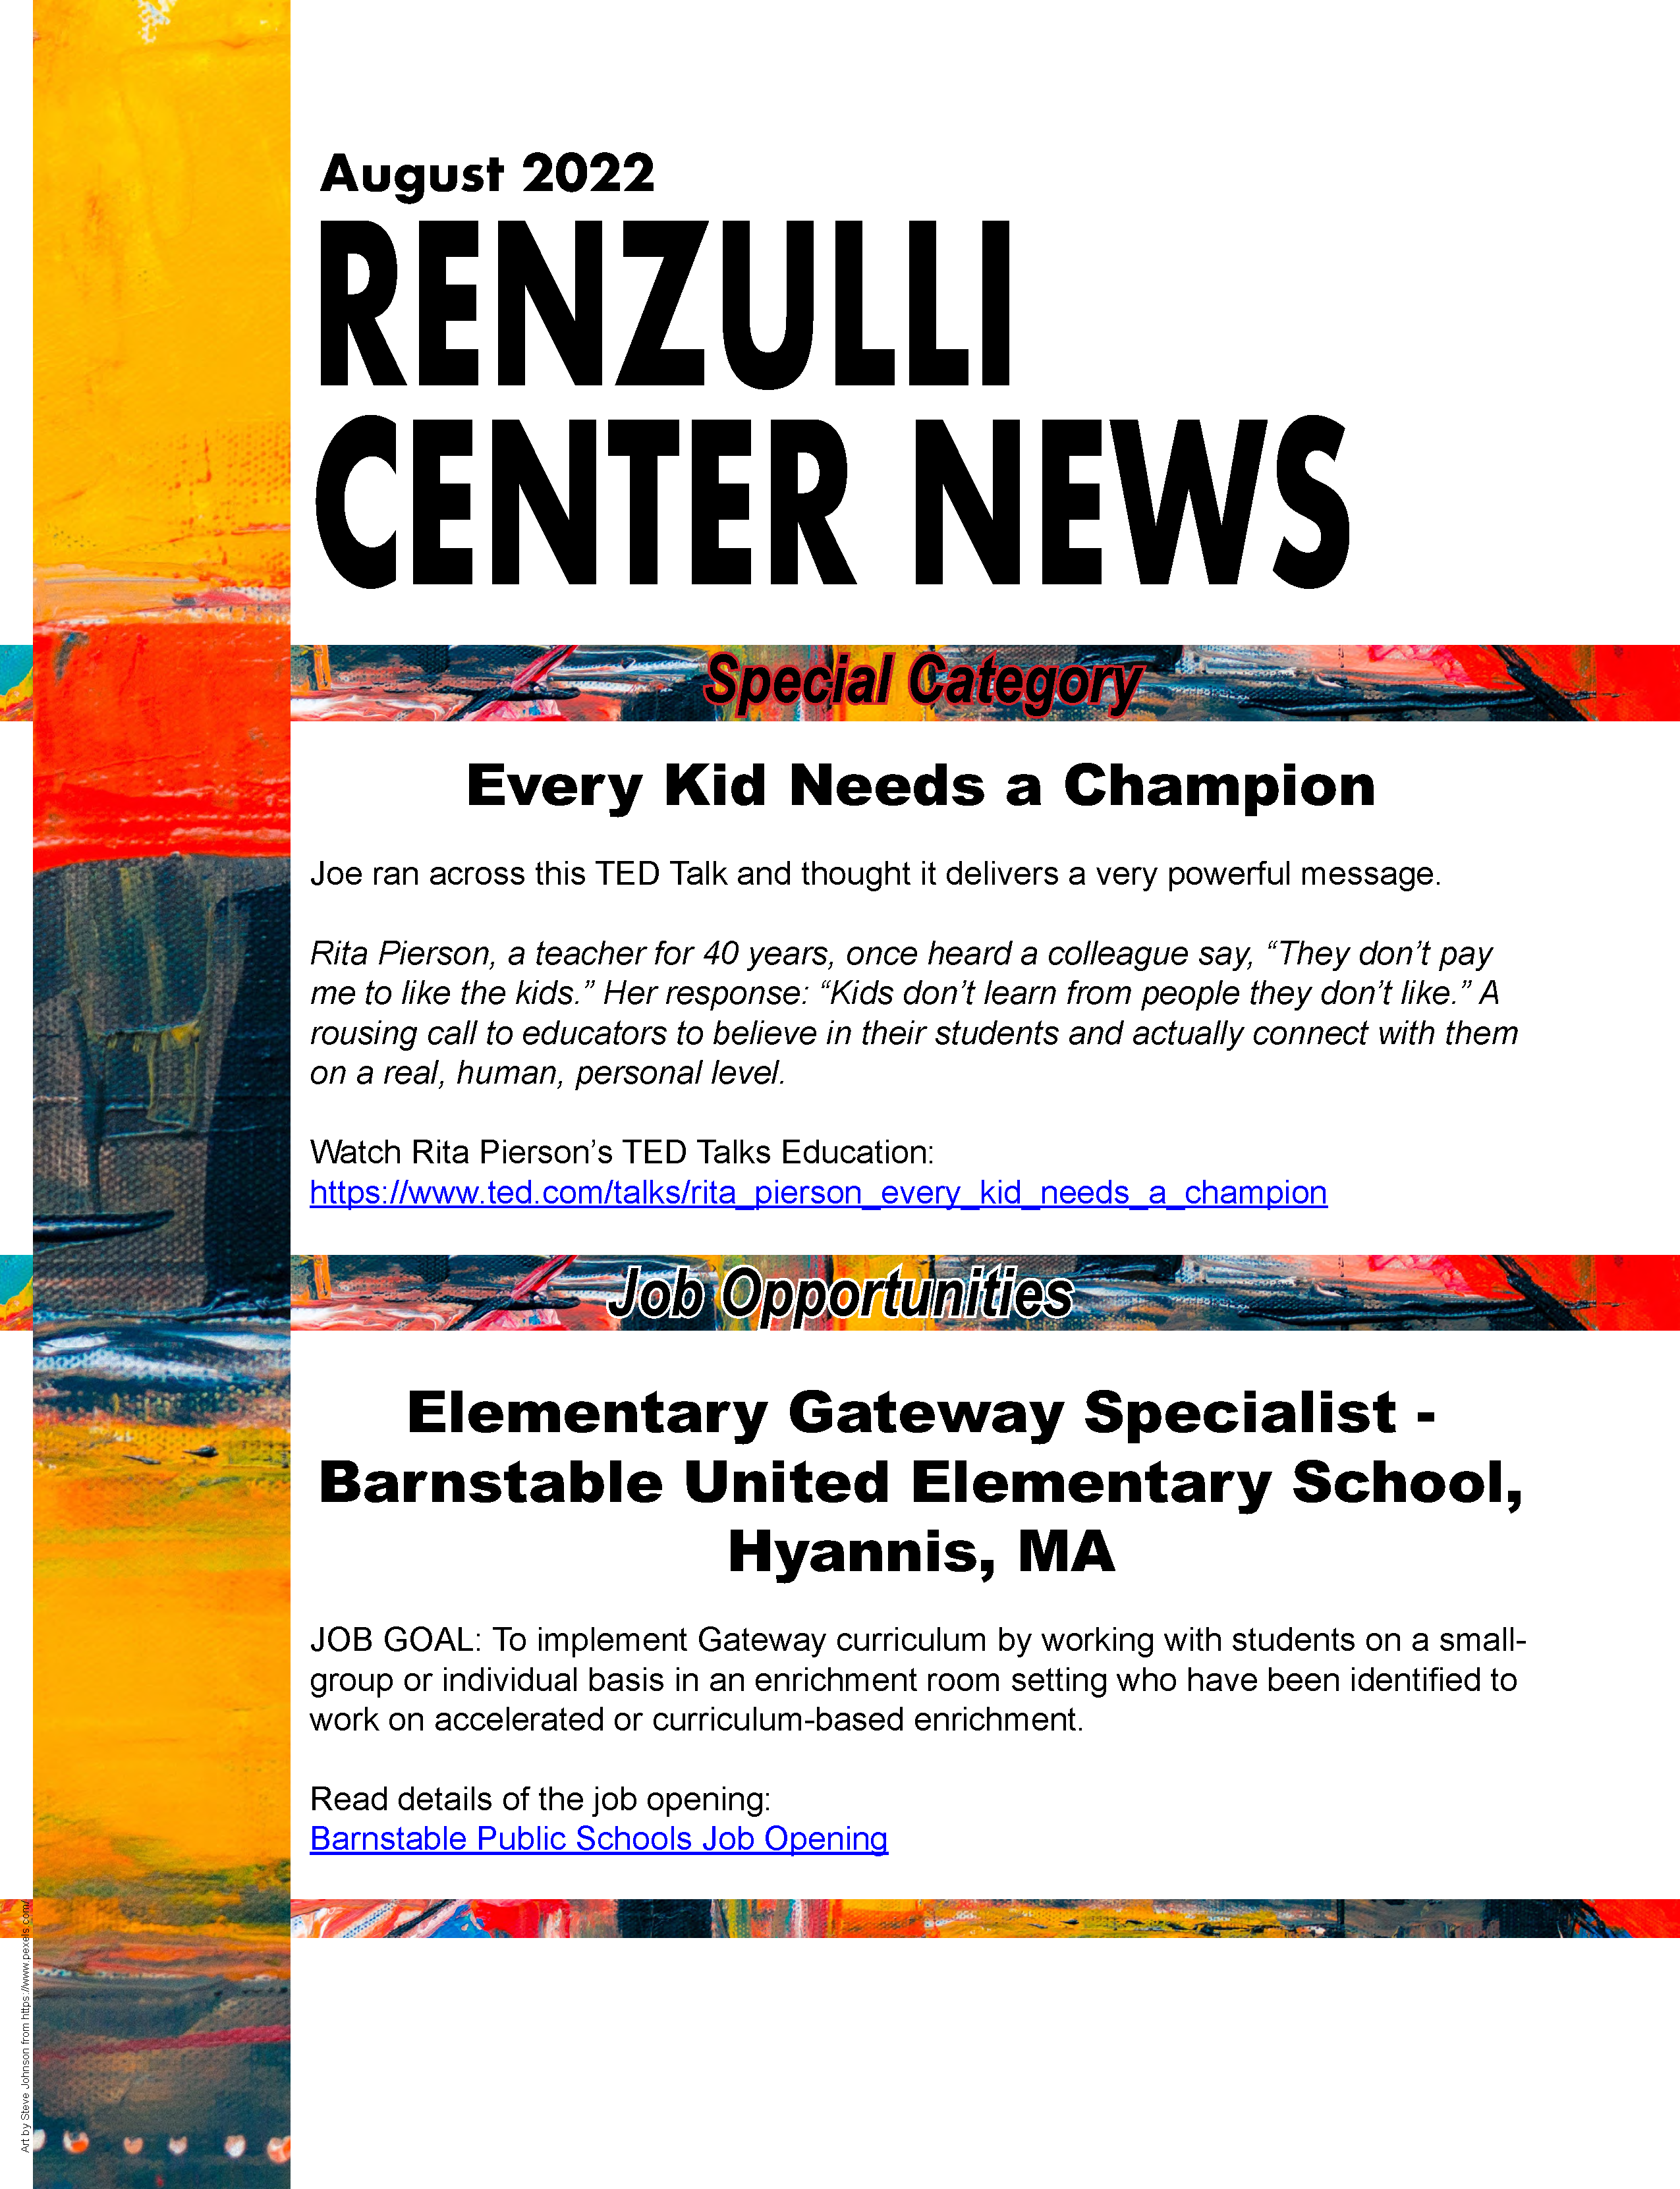 August 2022 Renzulli News Cover Graphic